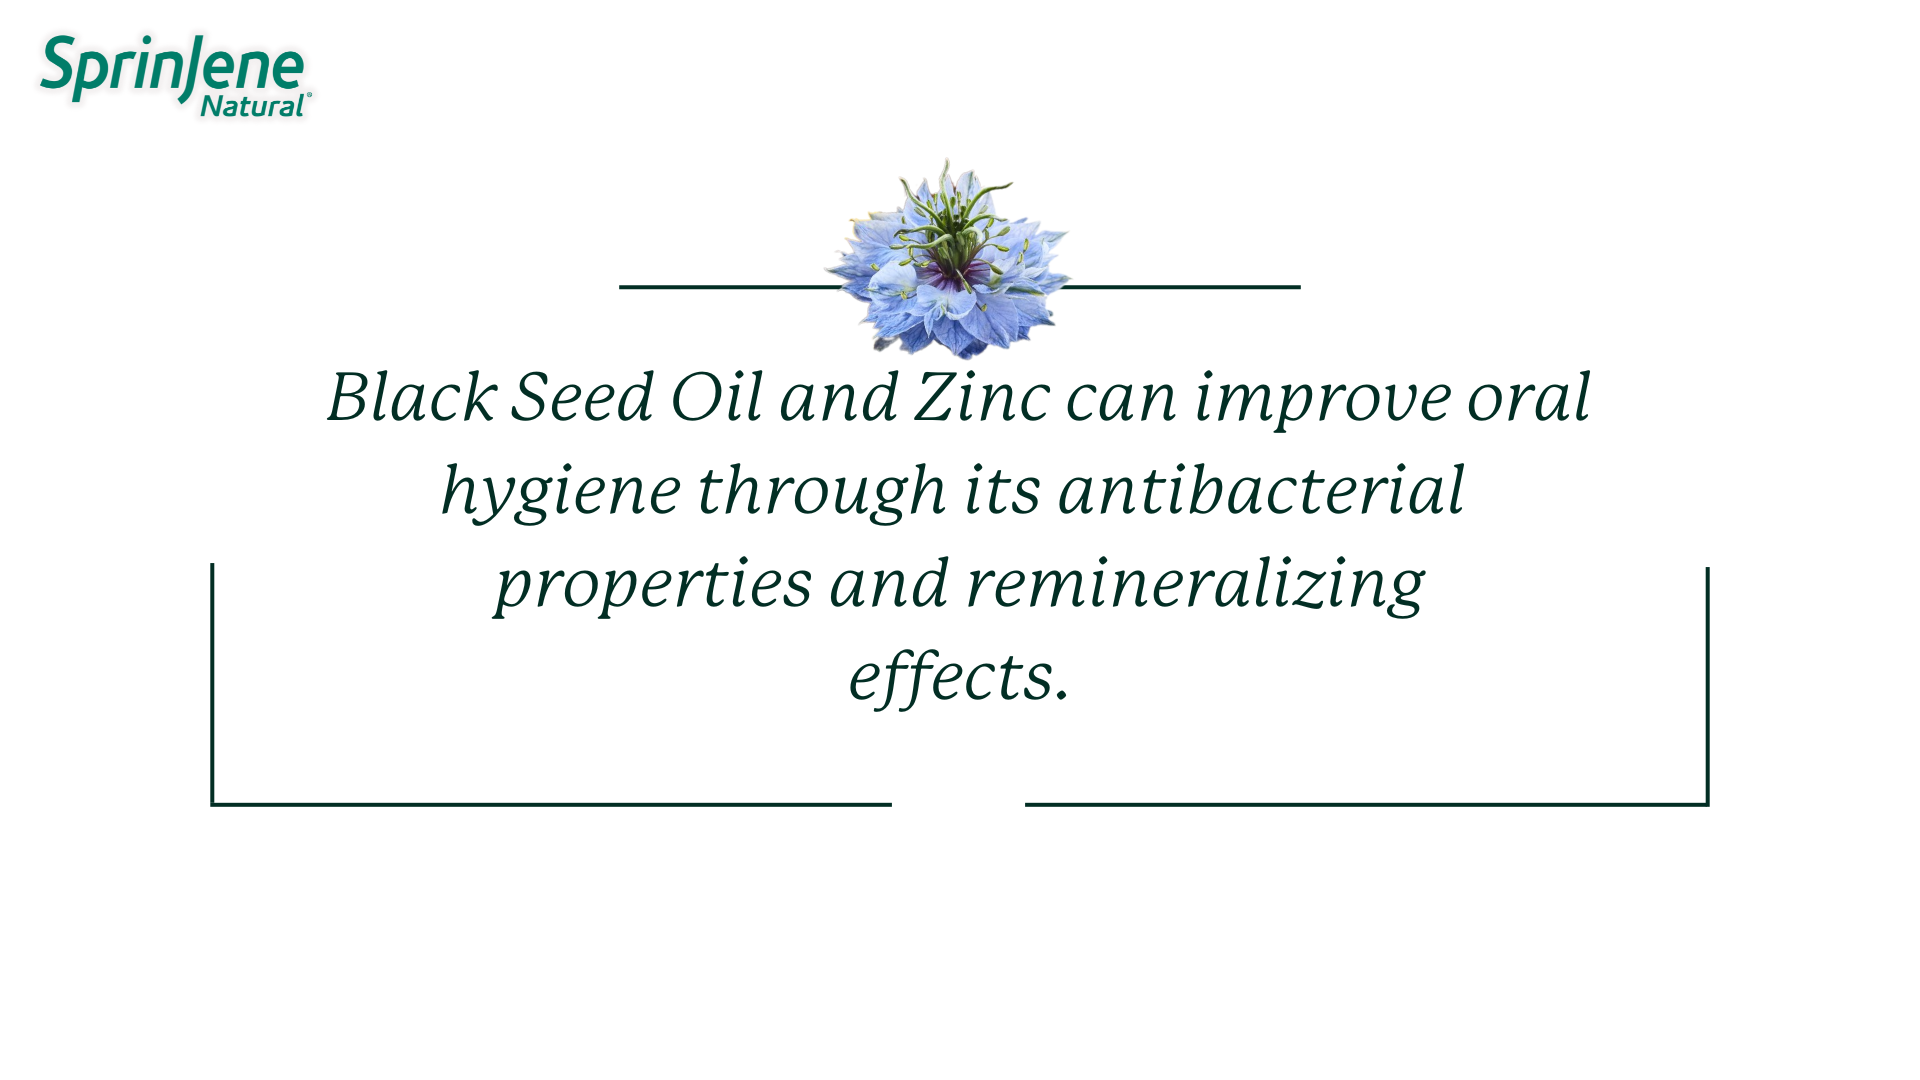 Black Seed Oil and Zinc can help improve oral hygiene